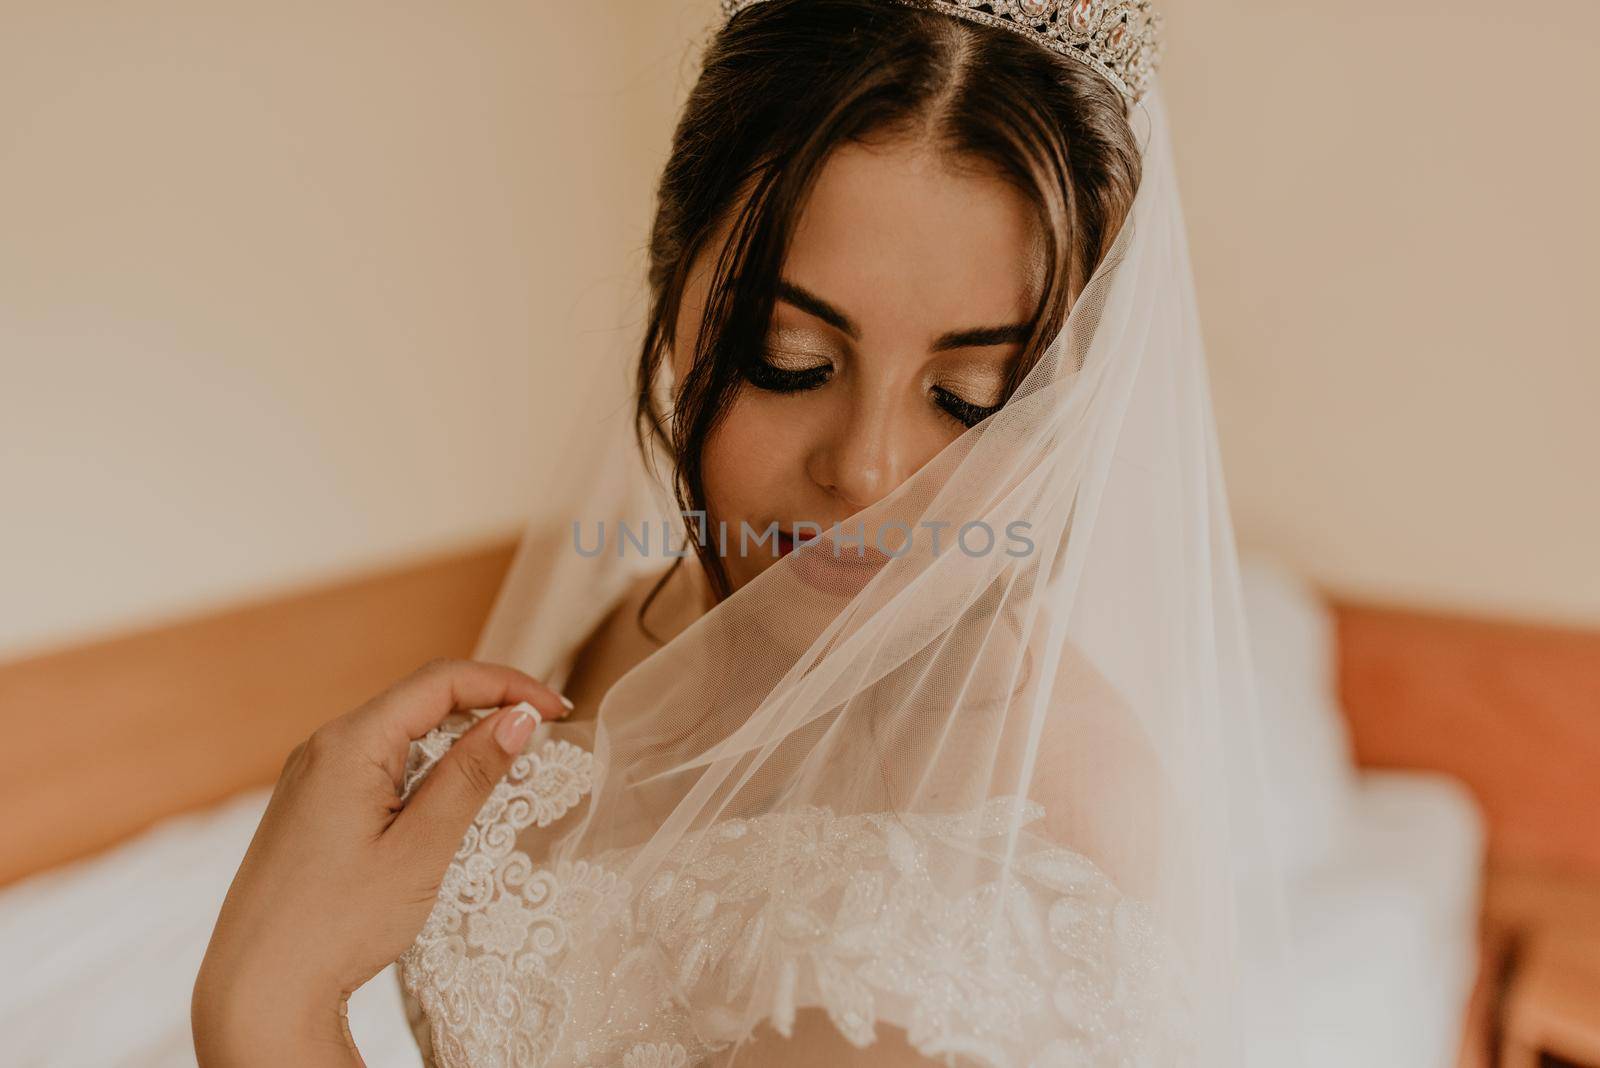 European Caucasian young black-haired woman bride in white wedding dress with long veil and tiara on head. girl bedroom in beige colors morning gatherings of preparing bride for holiday party wedding